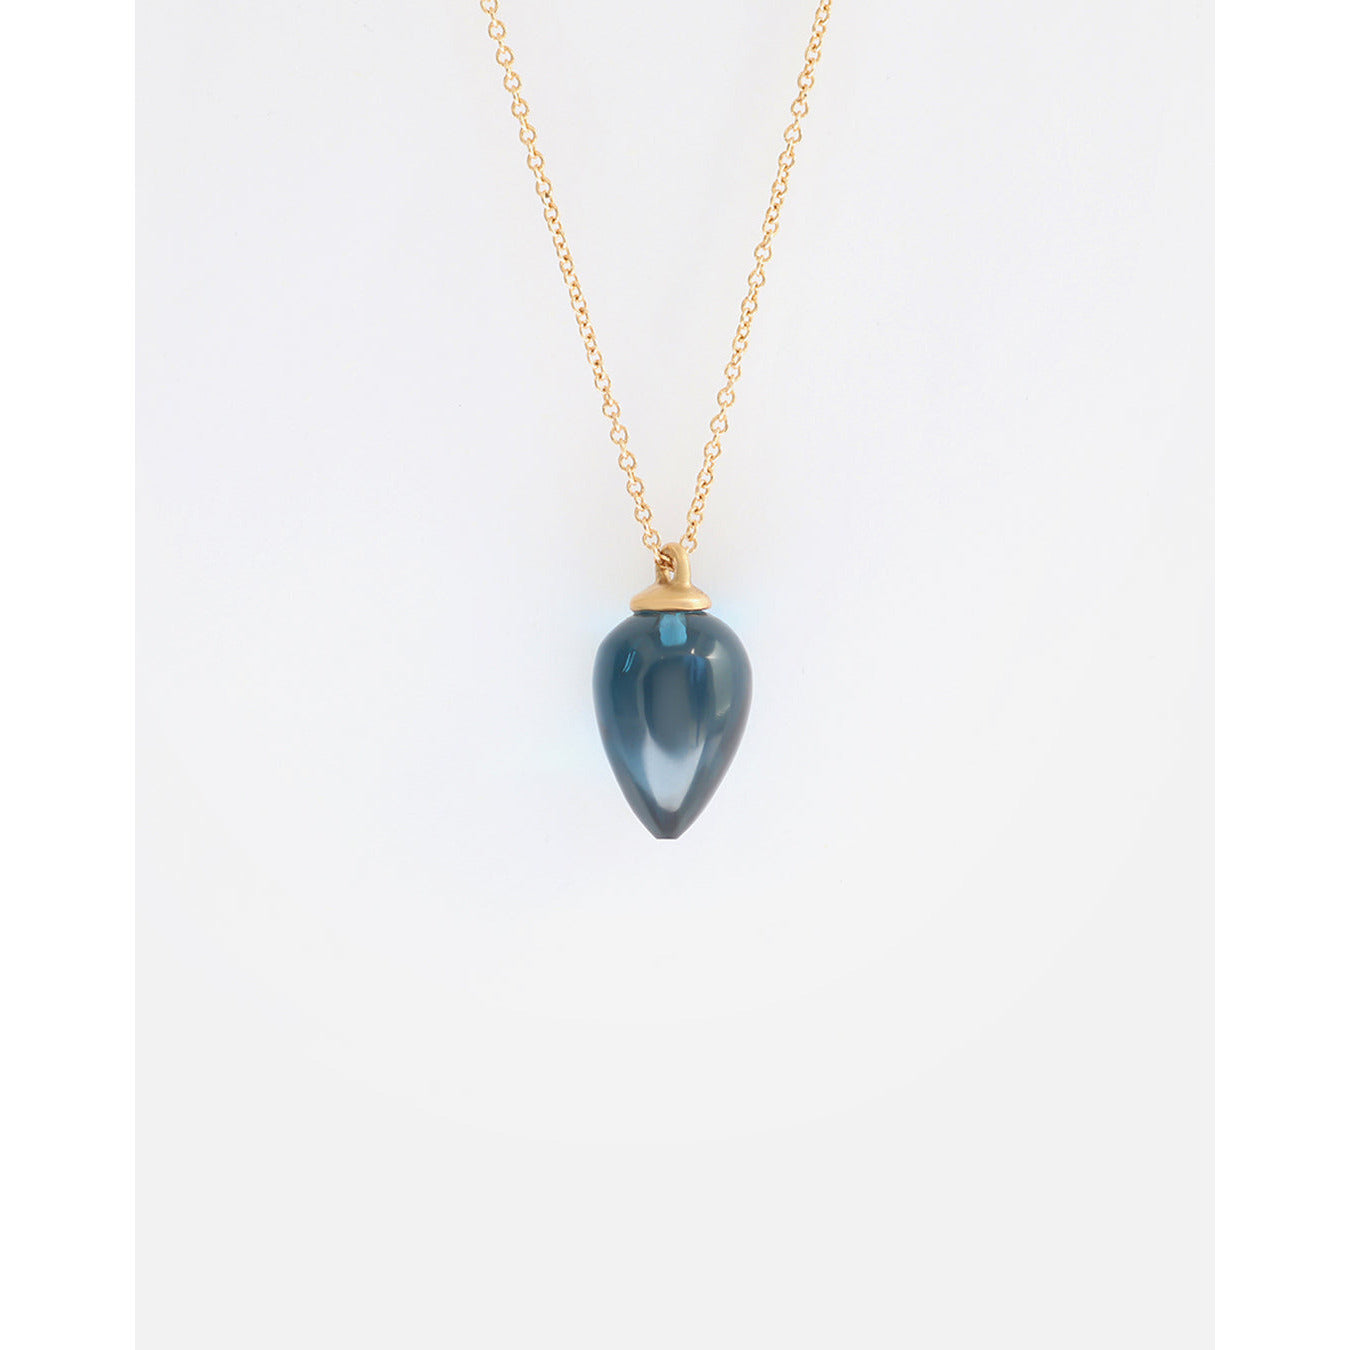 Adorn yourself with the breathtaking beauty of London Blue Topaz. This elegant necklace showcases the stunning blue gemstone w  Pear Shaped Blue Topaz Stone HxW: 13.8mm x 9.05mm 18" Chain 14k Yellow Gold Polished Finish